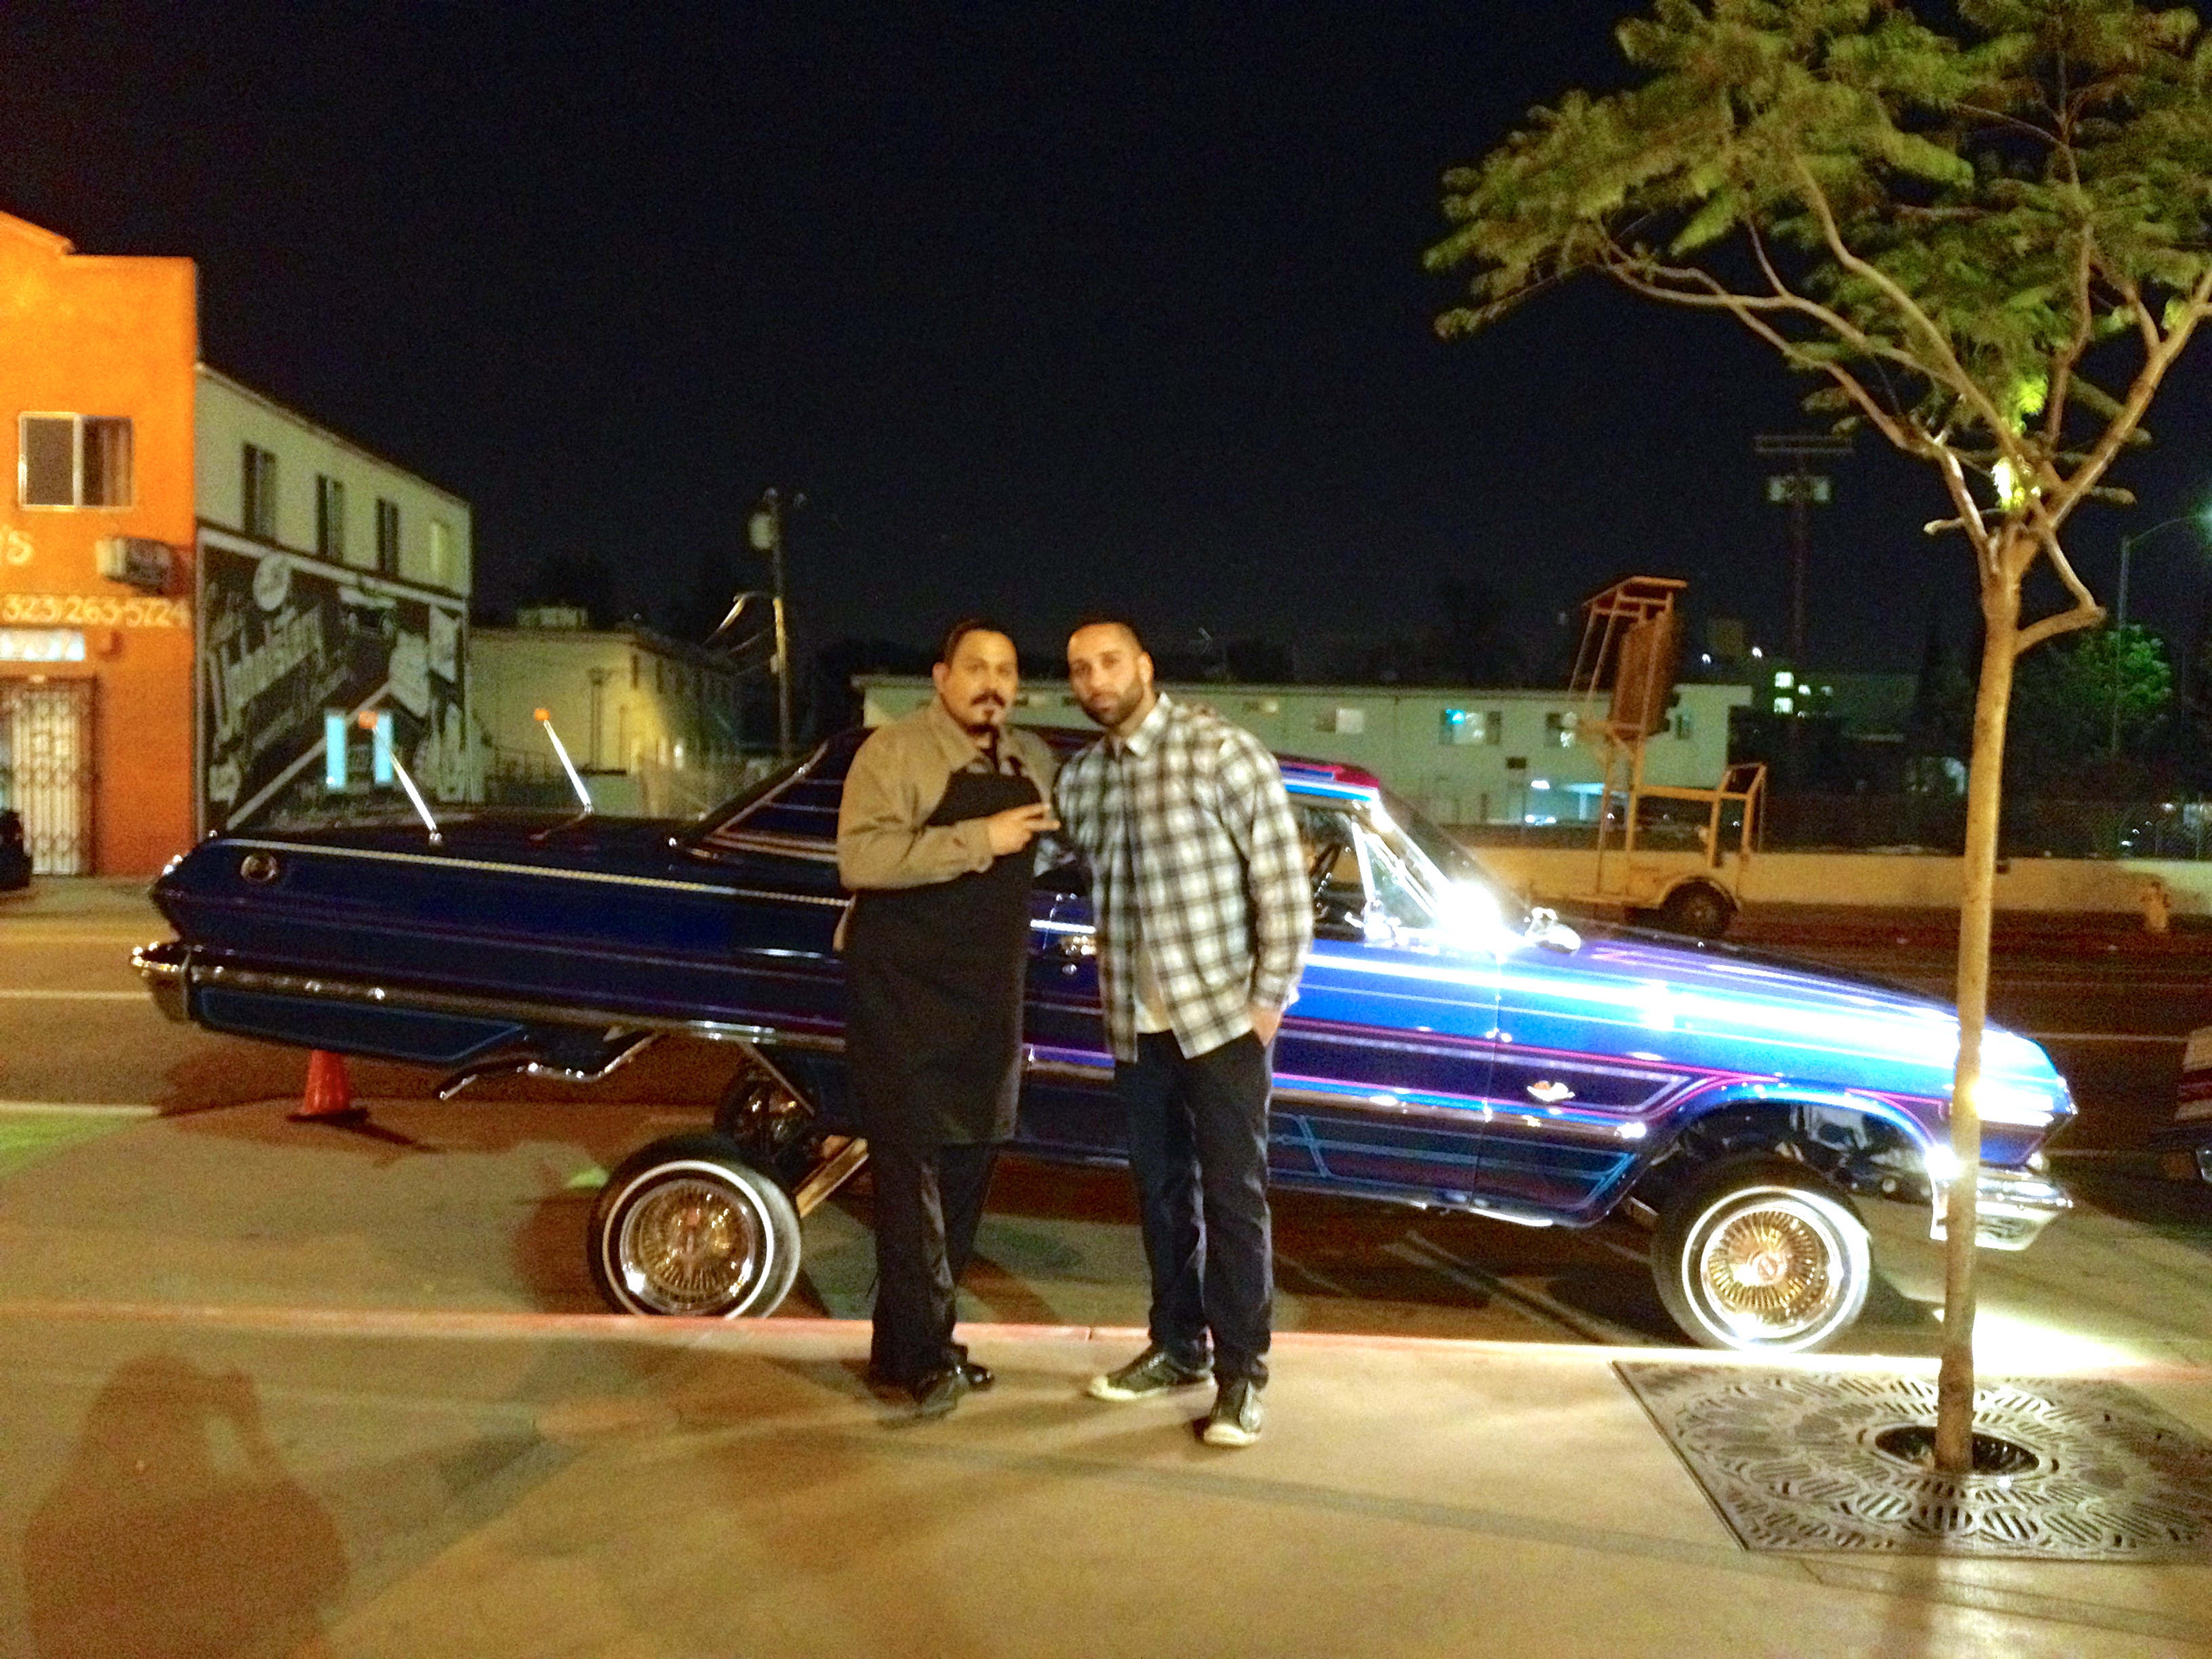 Actors Emilio Rivera & Sam Sheikhan on the set of the TV Series Gang Related...